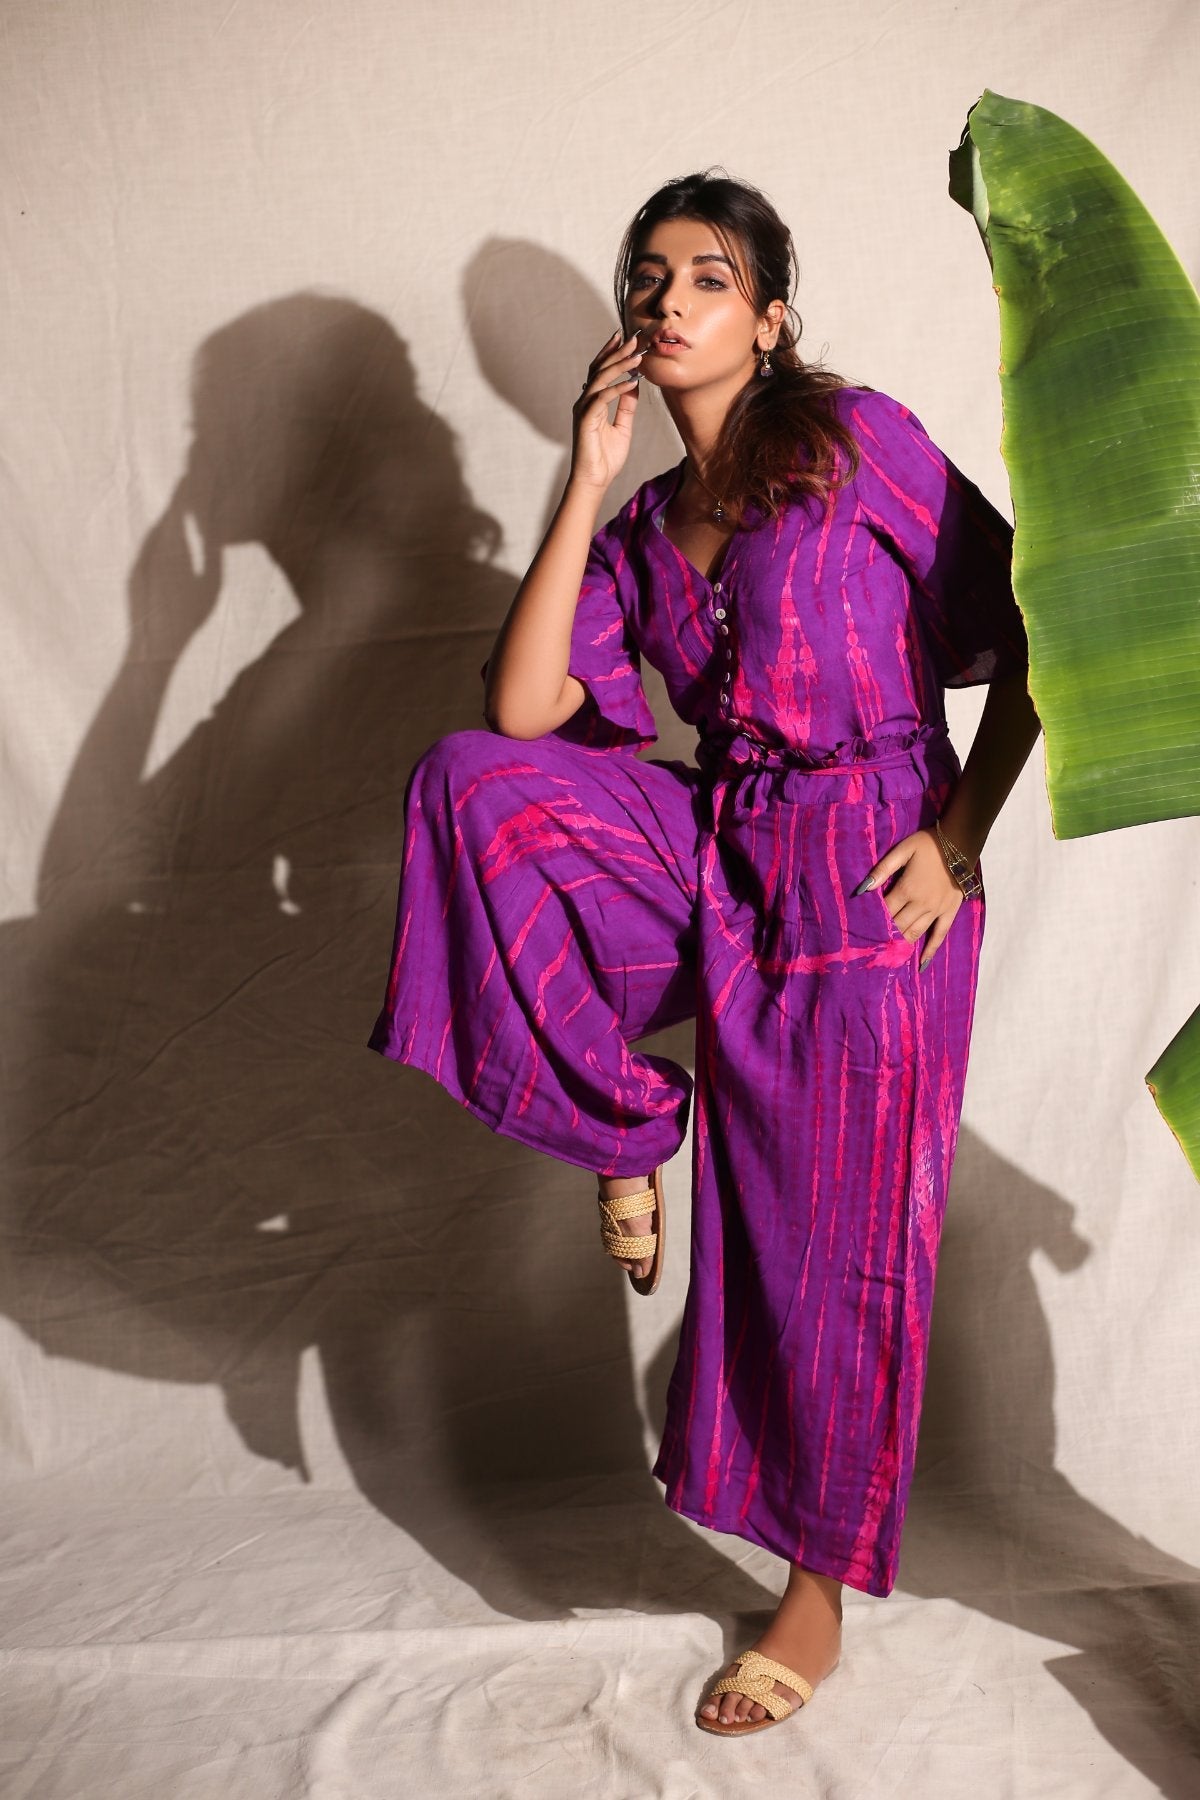 Pink Tie & Dye Top And Pants-Sets Of Two at Kamakhyaa by Keva. This item is Best Selling, Co-ord Sets, Day Dream, Natural, Pink, Printed Selfsame, Purple, Rayon, Relaxed Fit, Resort Wear, Tie & Dye, Vacation, Vacation Co-ords, Womenswear